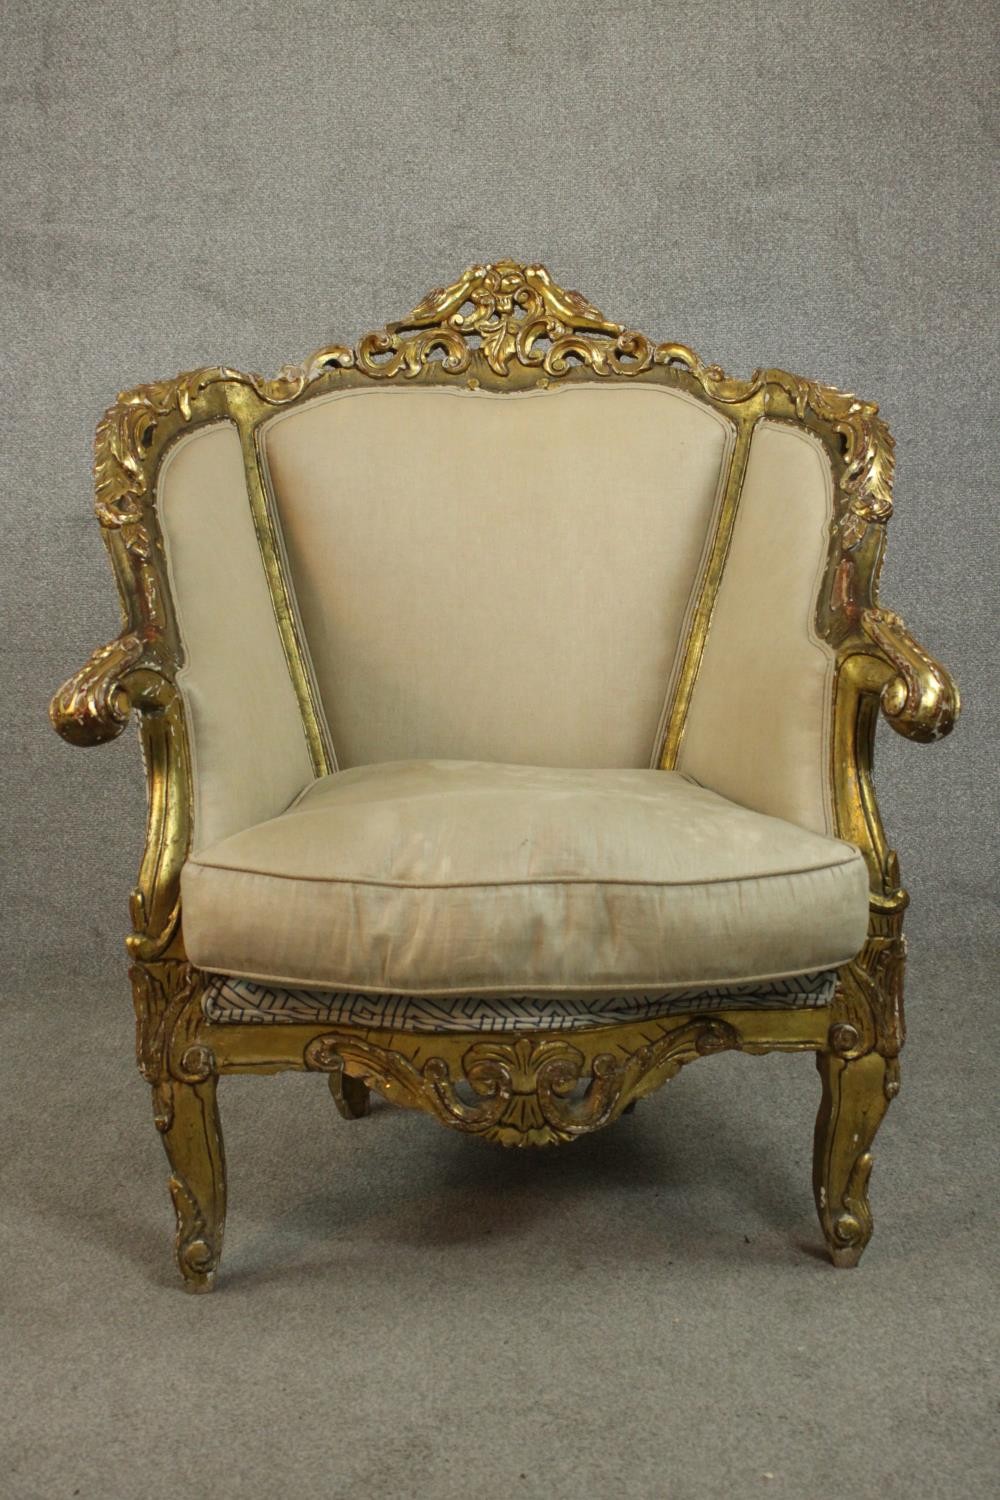 A pair of Louis XV style carved giltwood armchairs, 20th century, upholstered in beige fabric, - Image 7 of 10